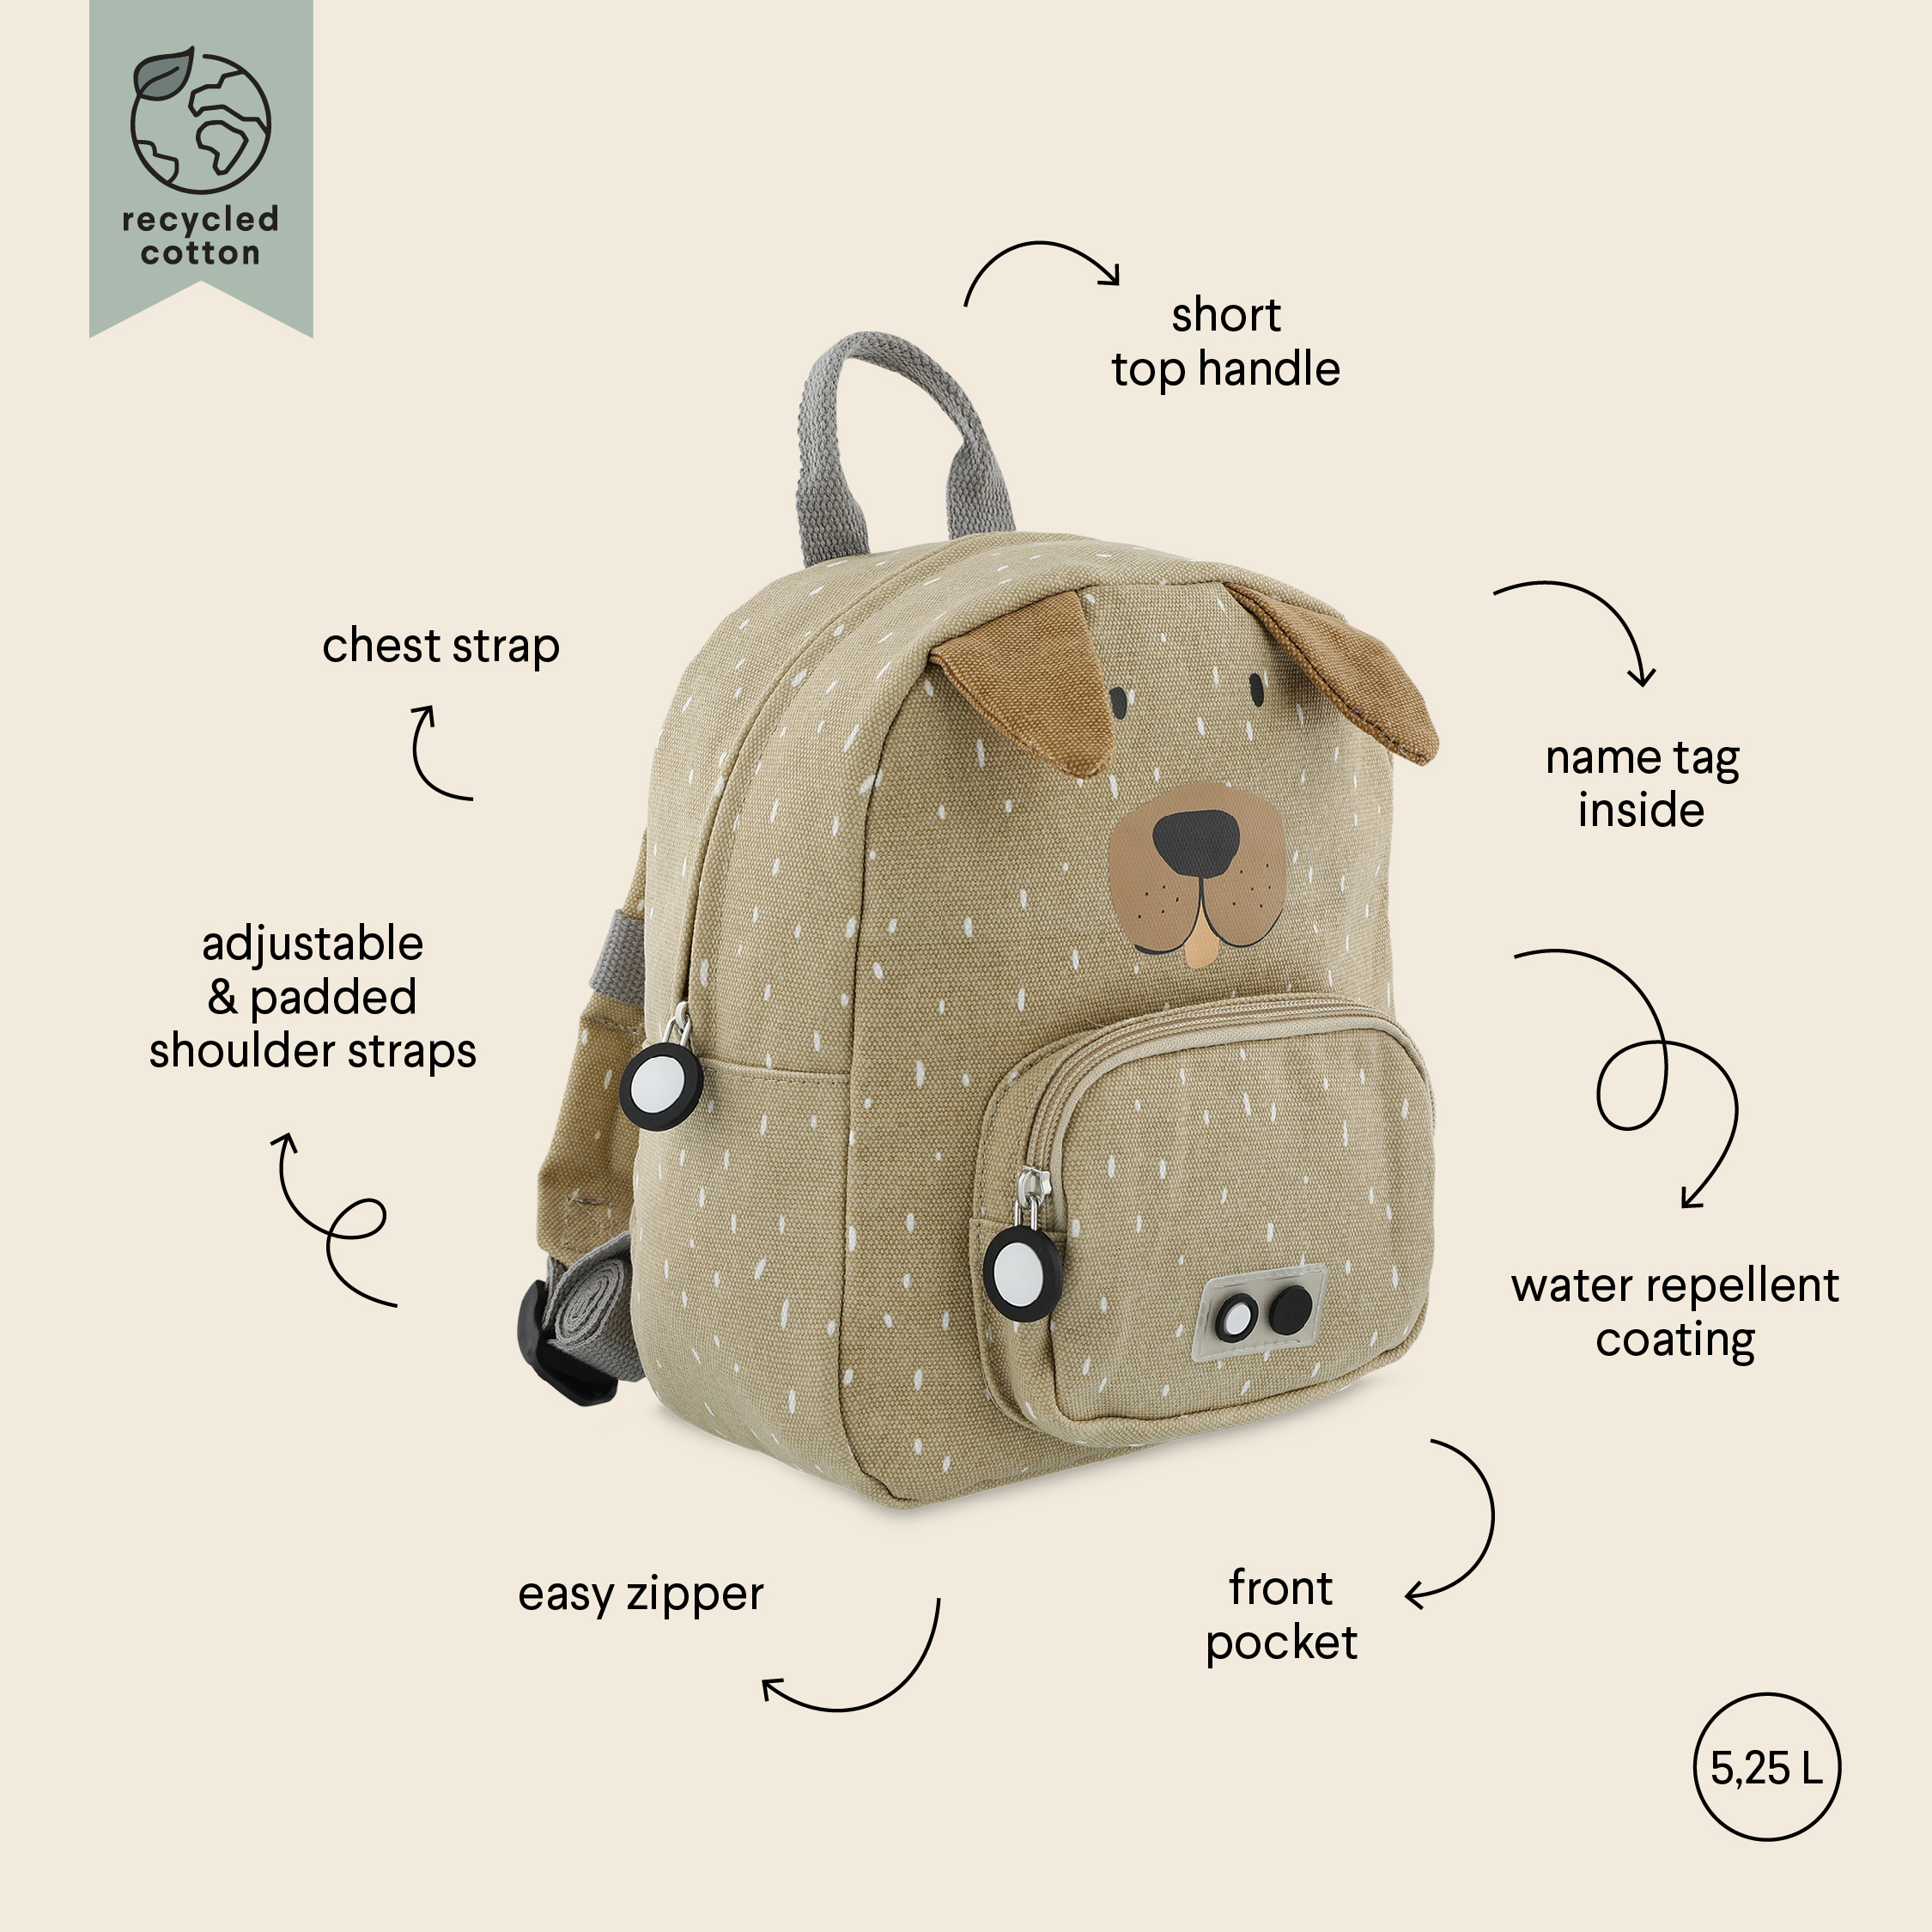 Backpack small - Mr. Dog